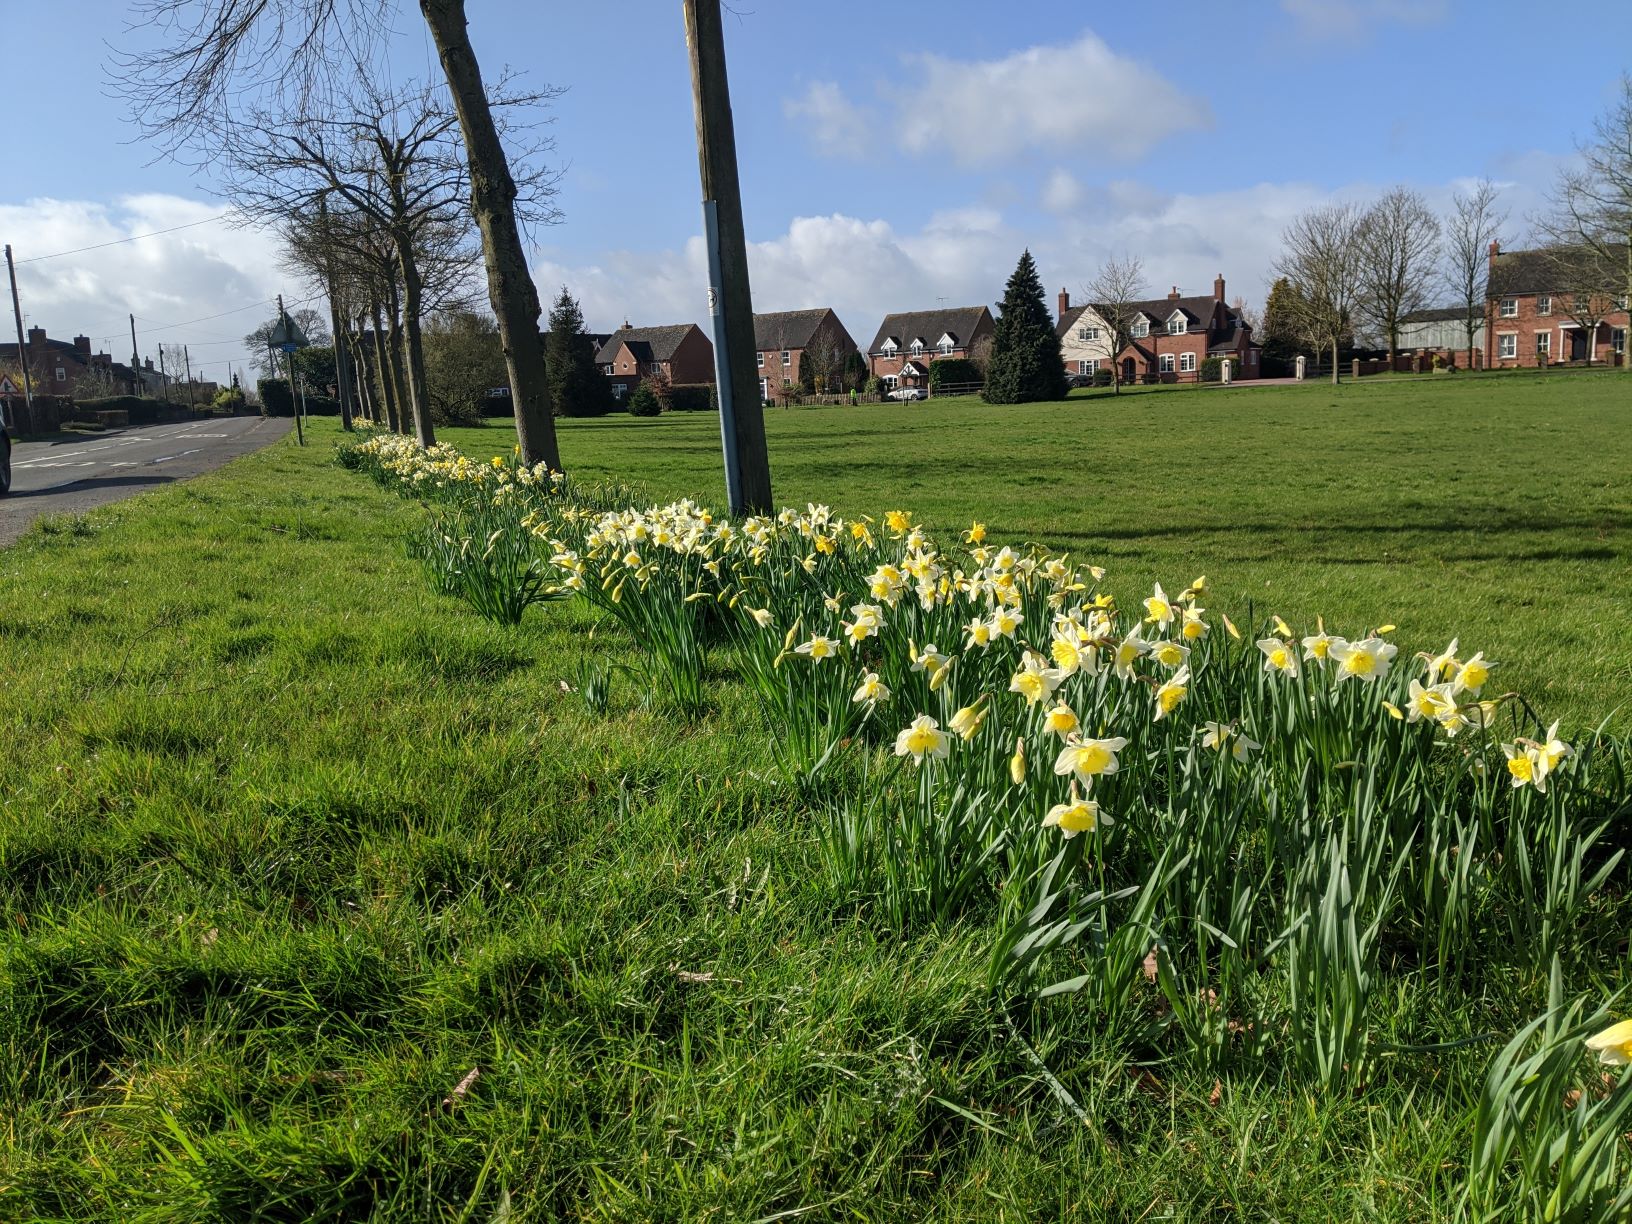 The Daffodils were in full bloom in the second week of March...